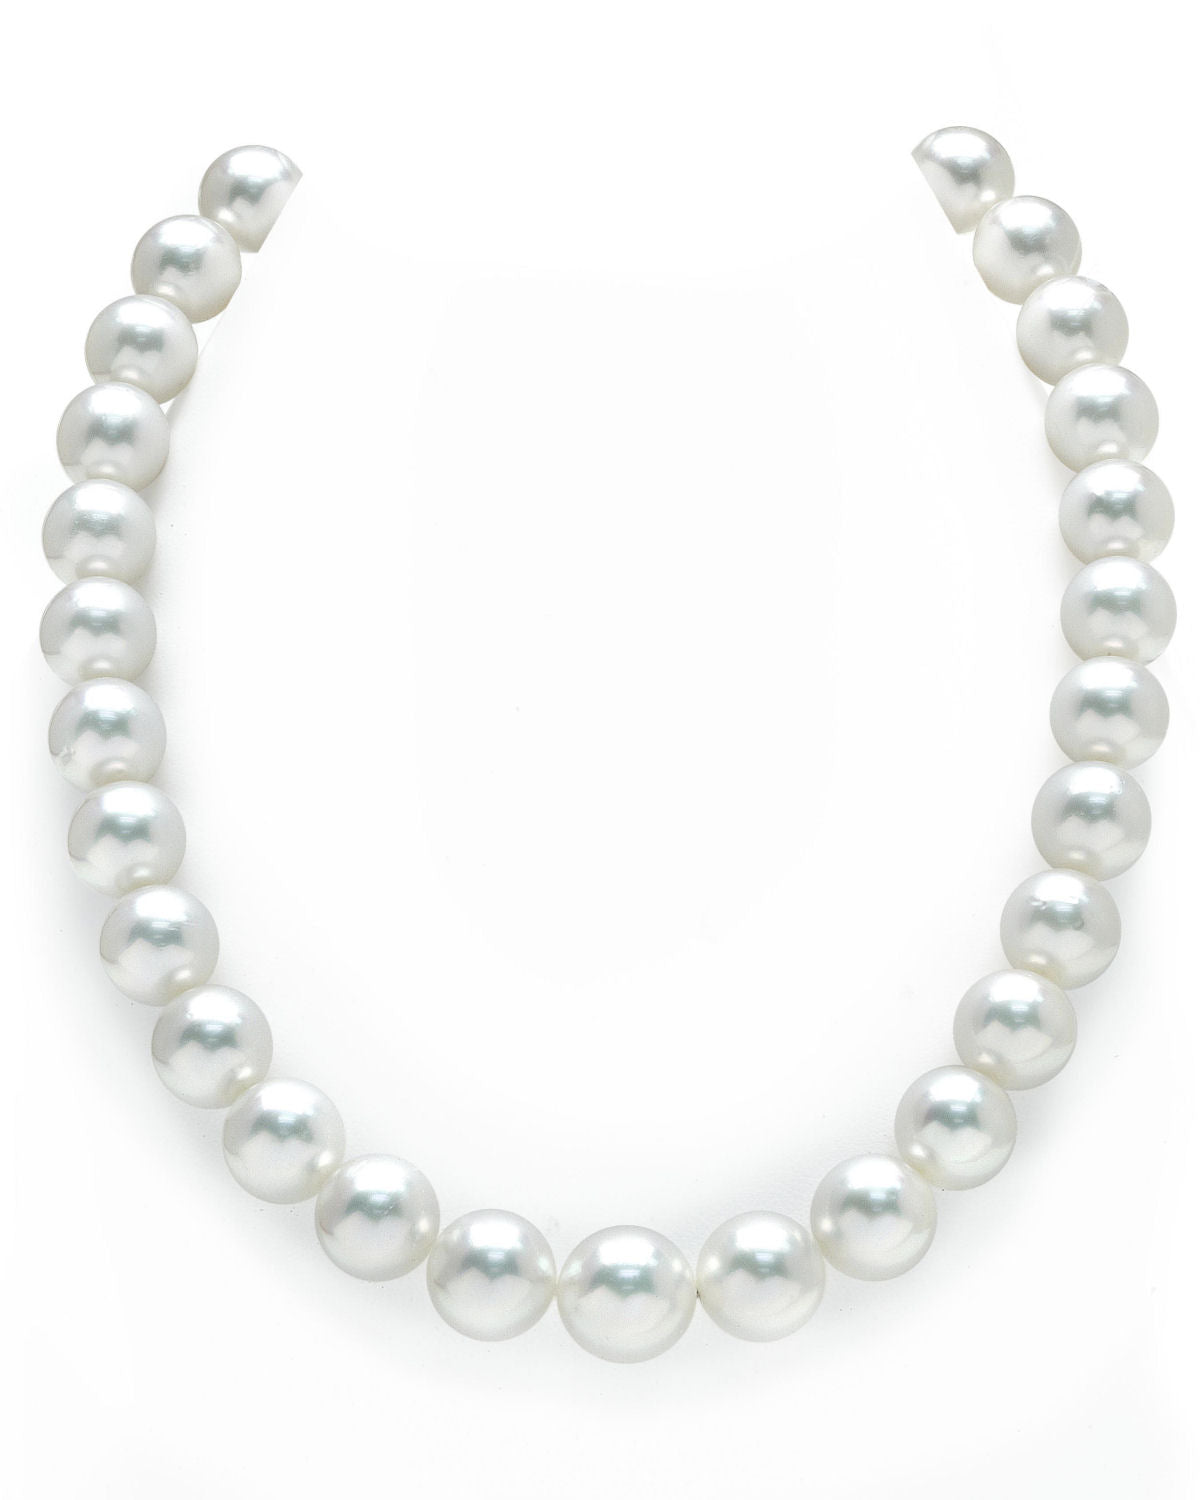 12-14mm White South Sea Pearl Necklace - AAA Quality